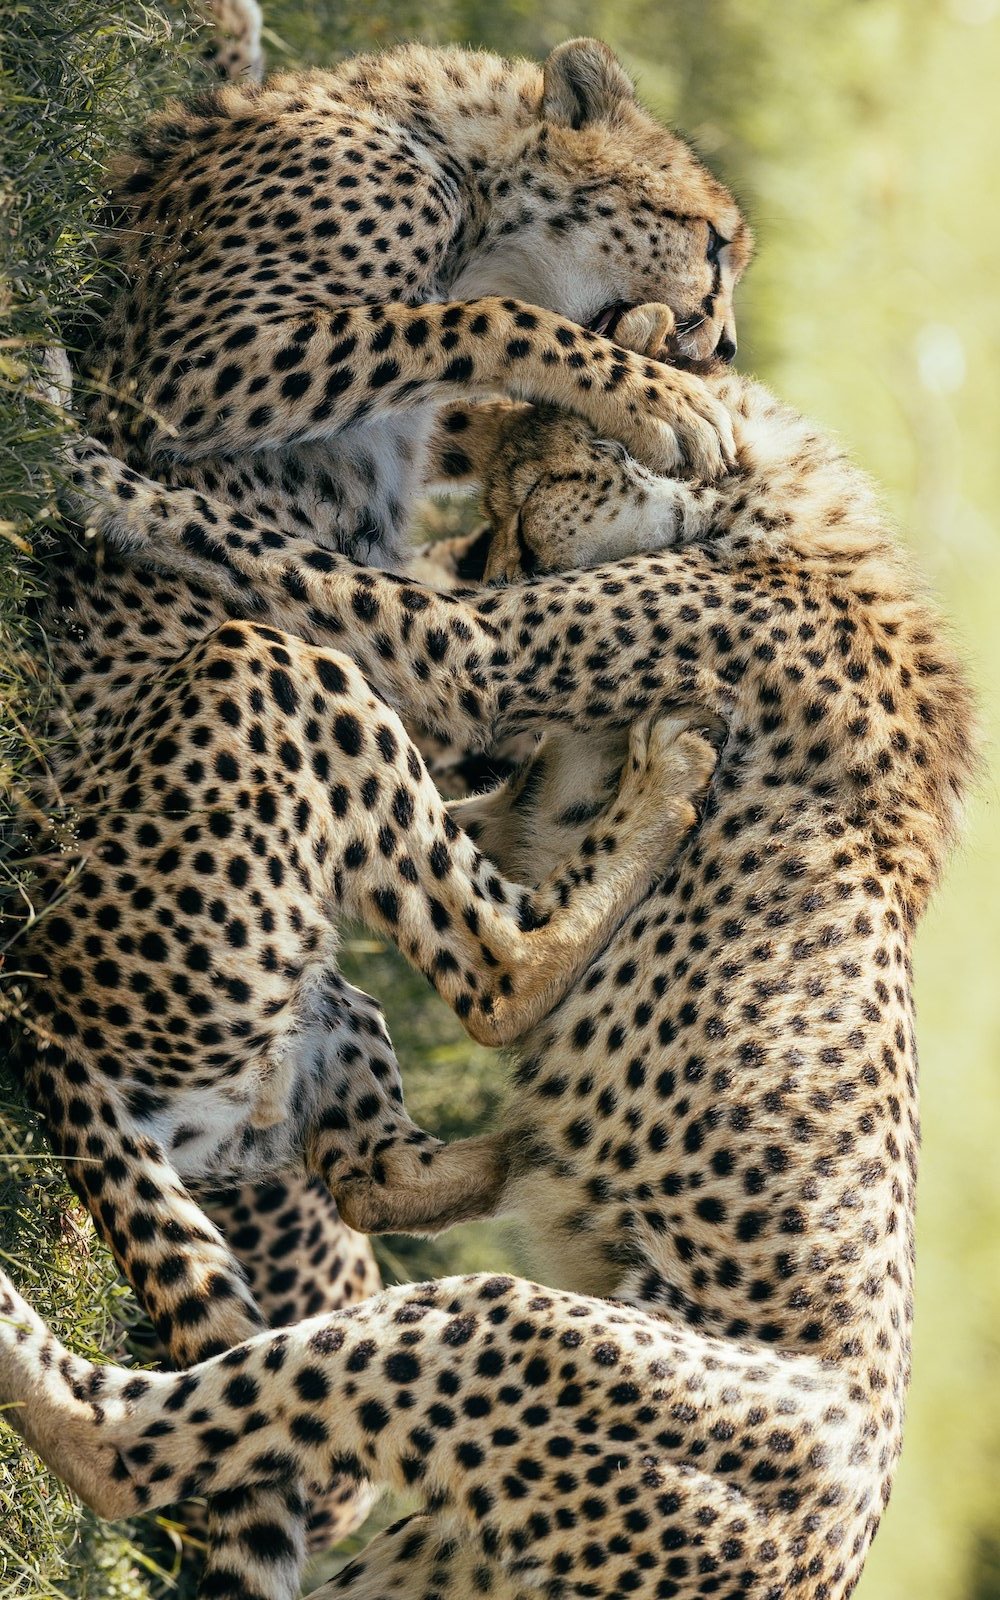 THE CHEETAH BROTHERS